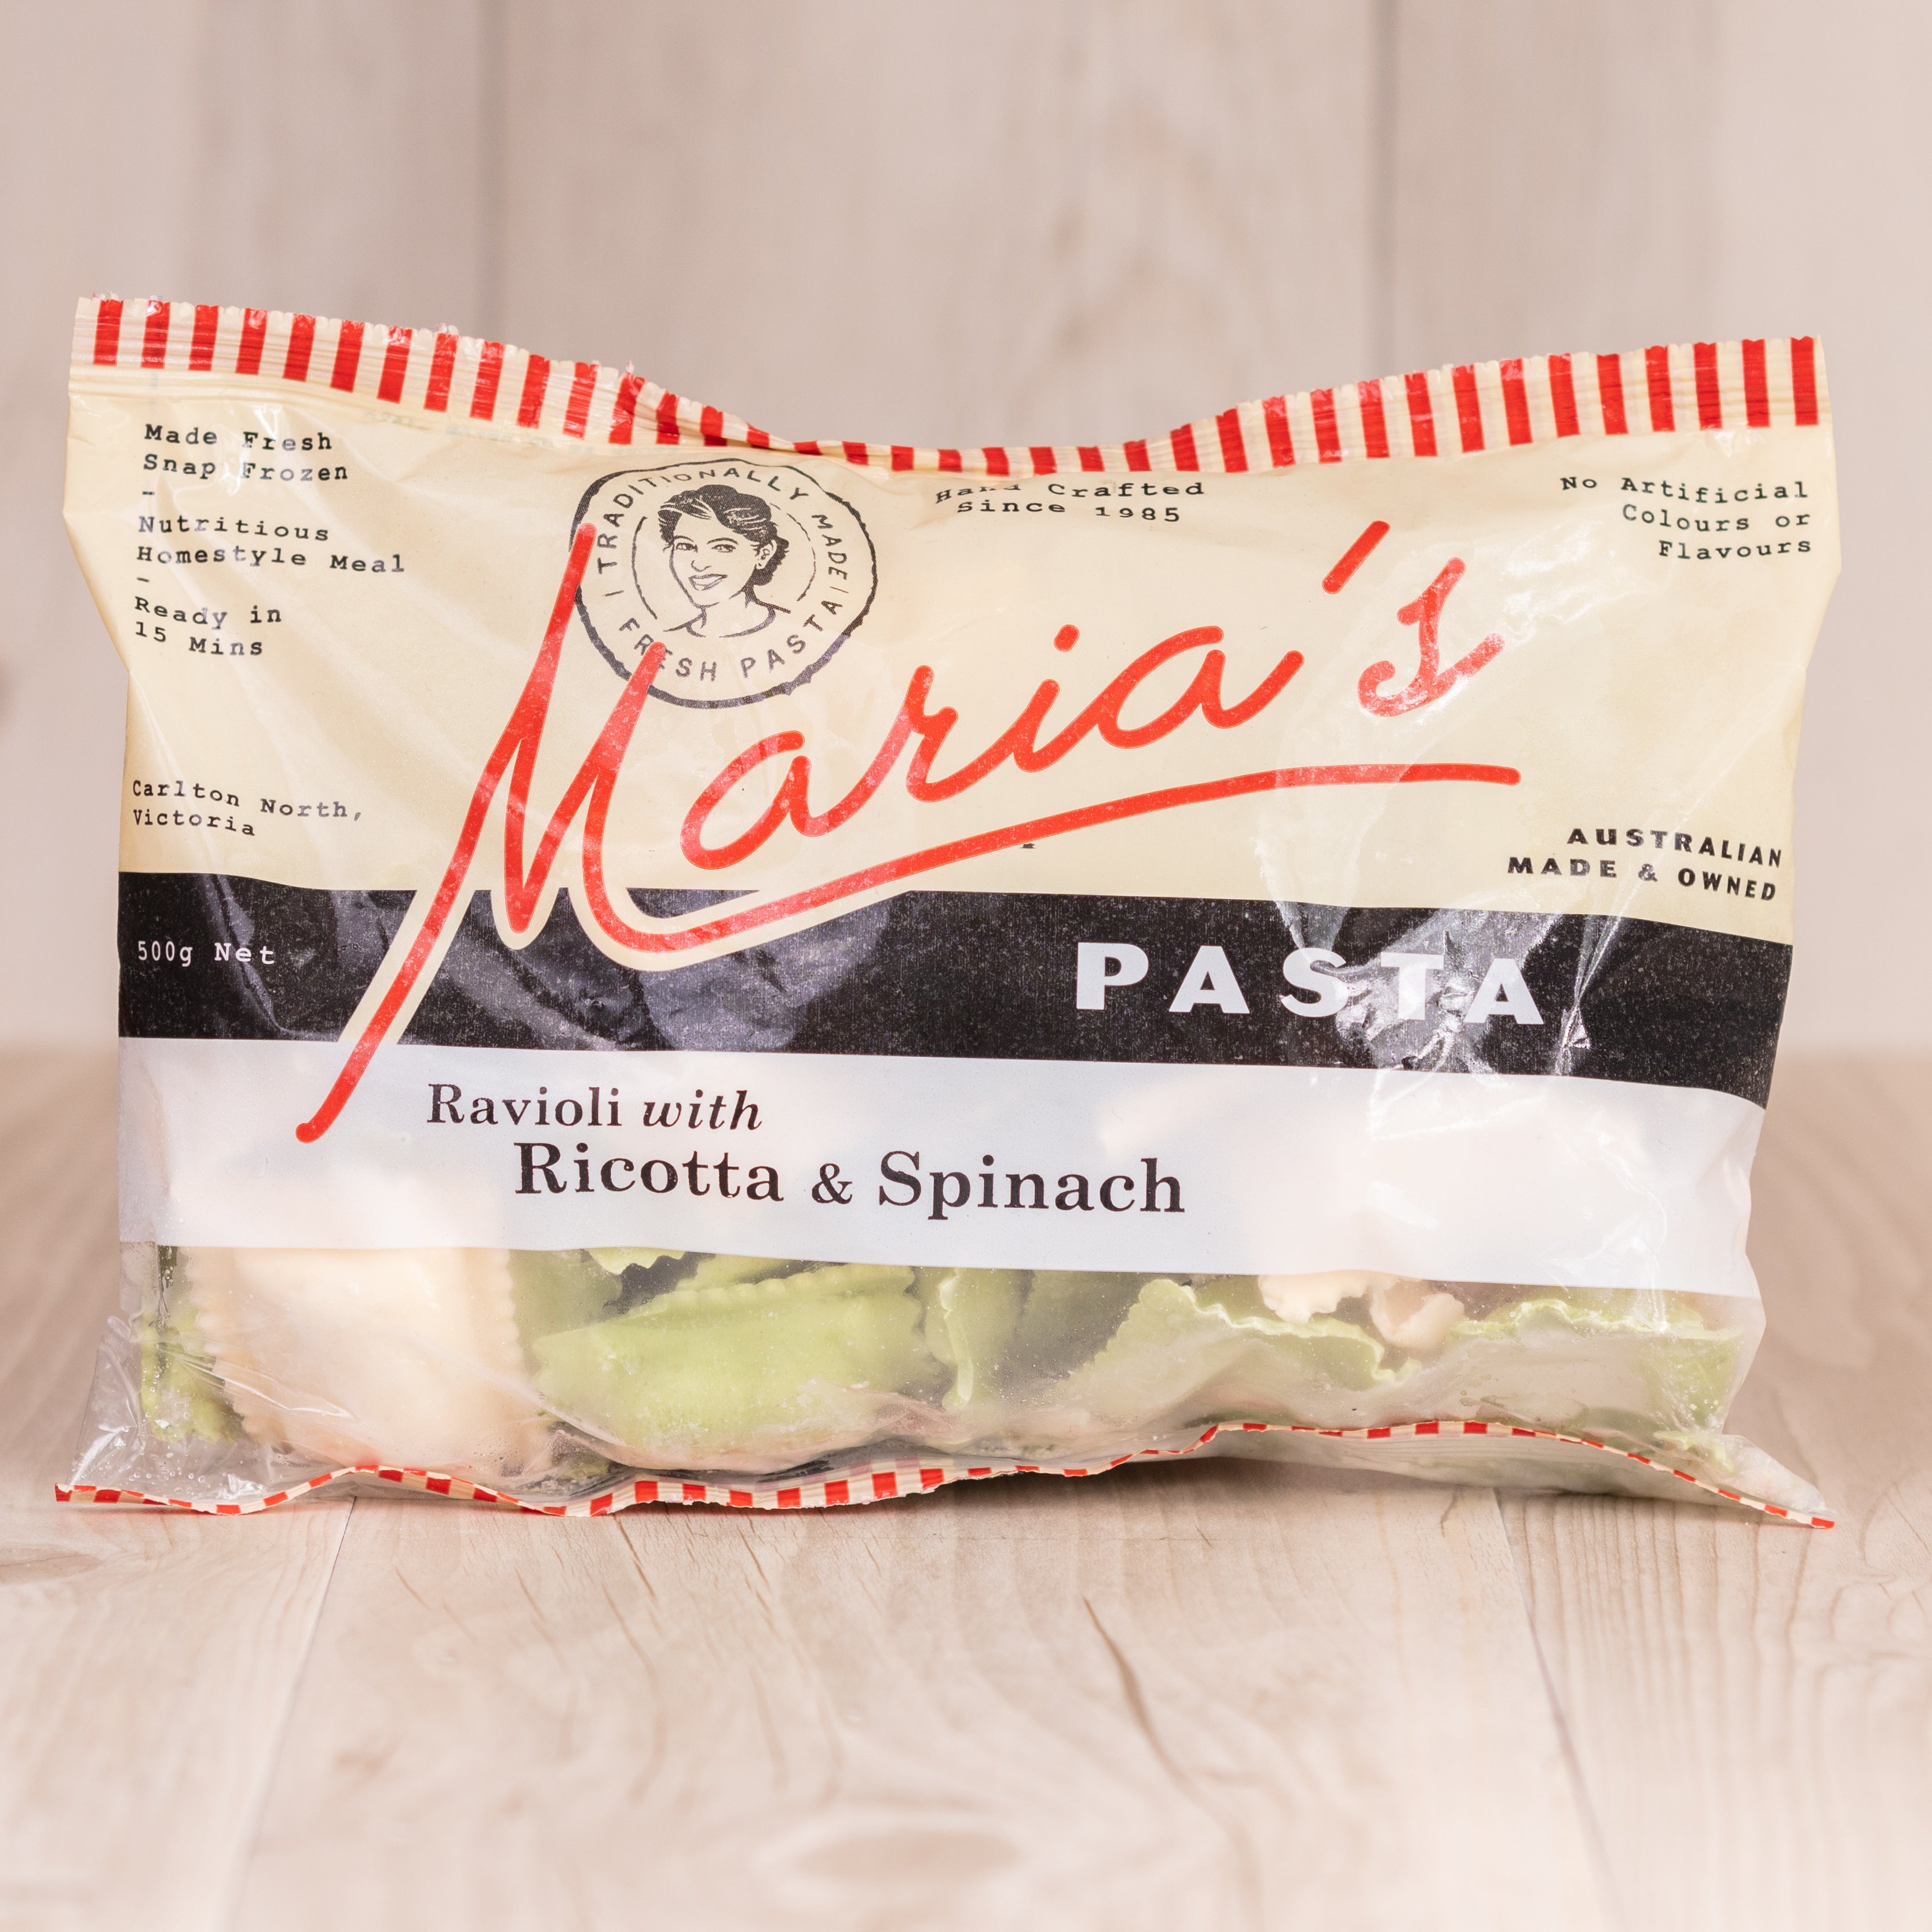 Marias Pasta Ravioli Ricotta and Spinach packaged